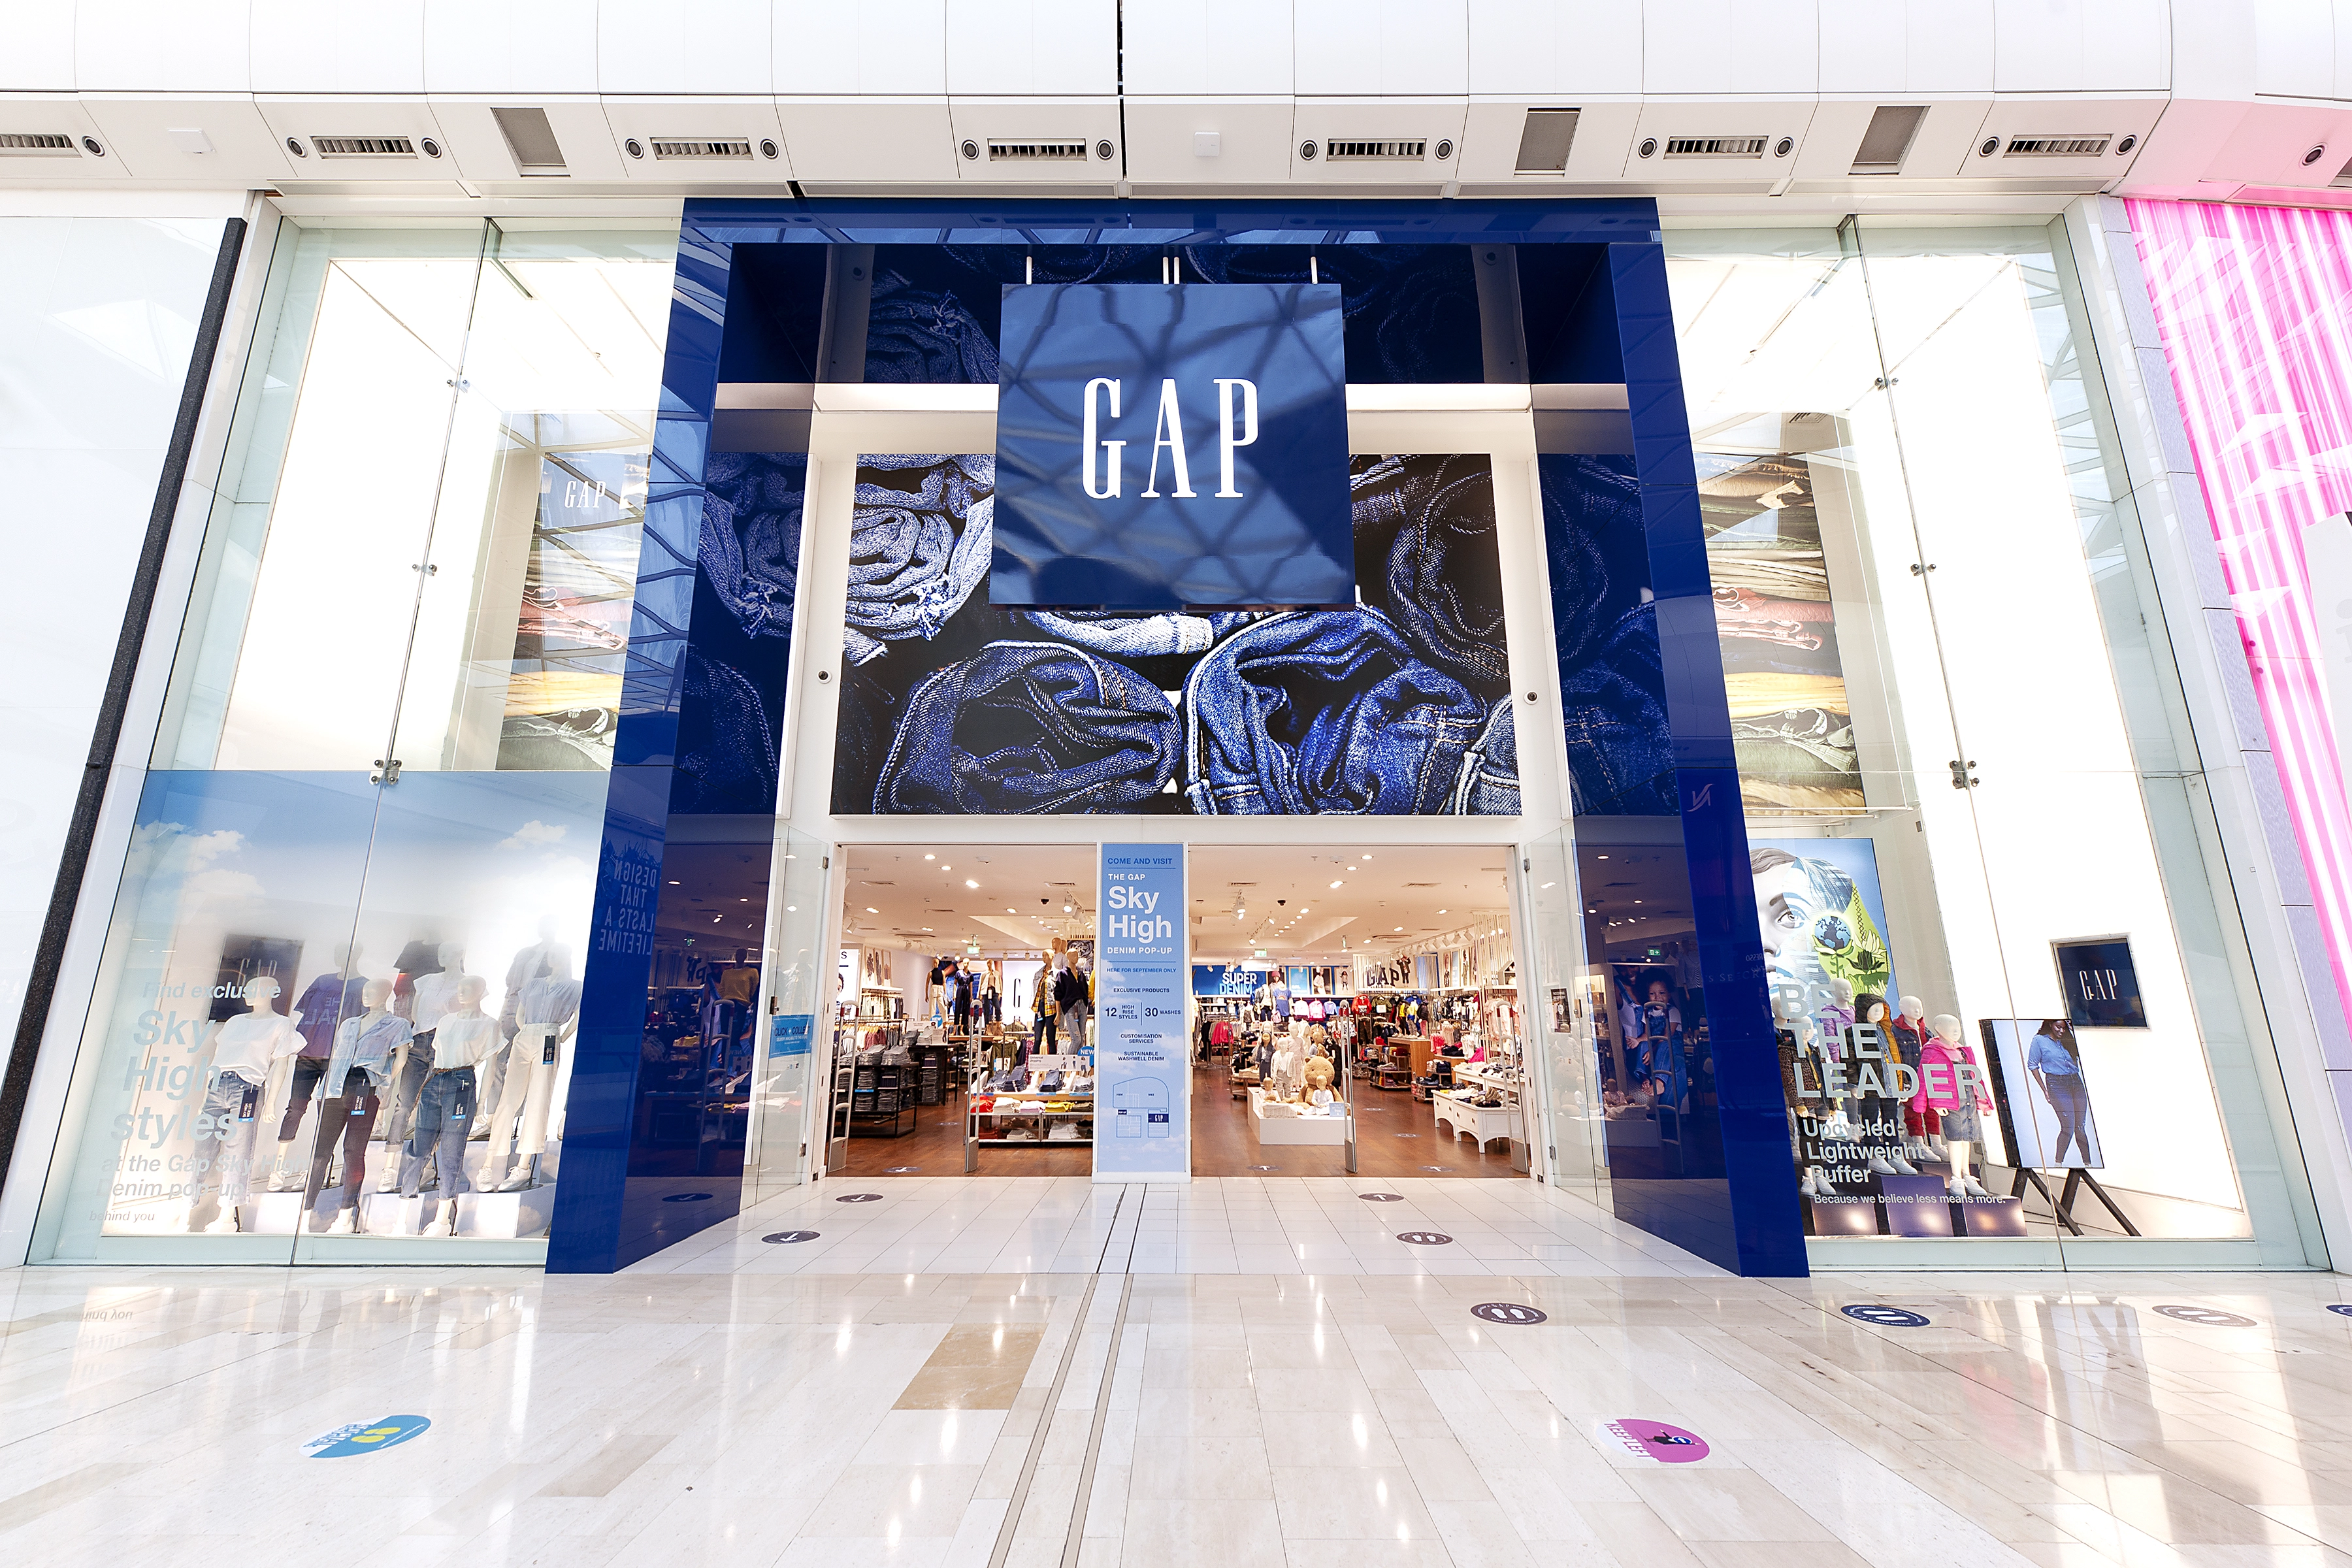 Gap Continues to Struggle – Visual Merchandising and Store Design